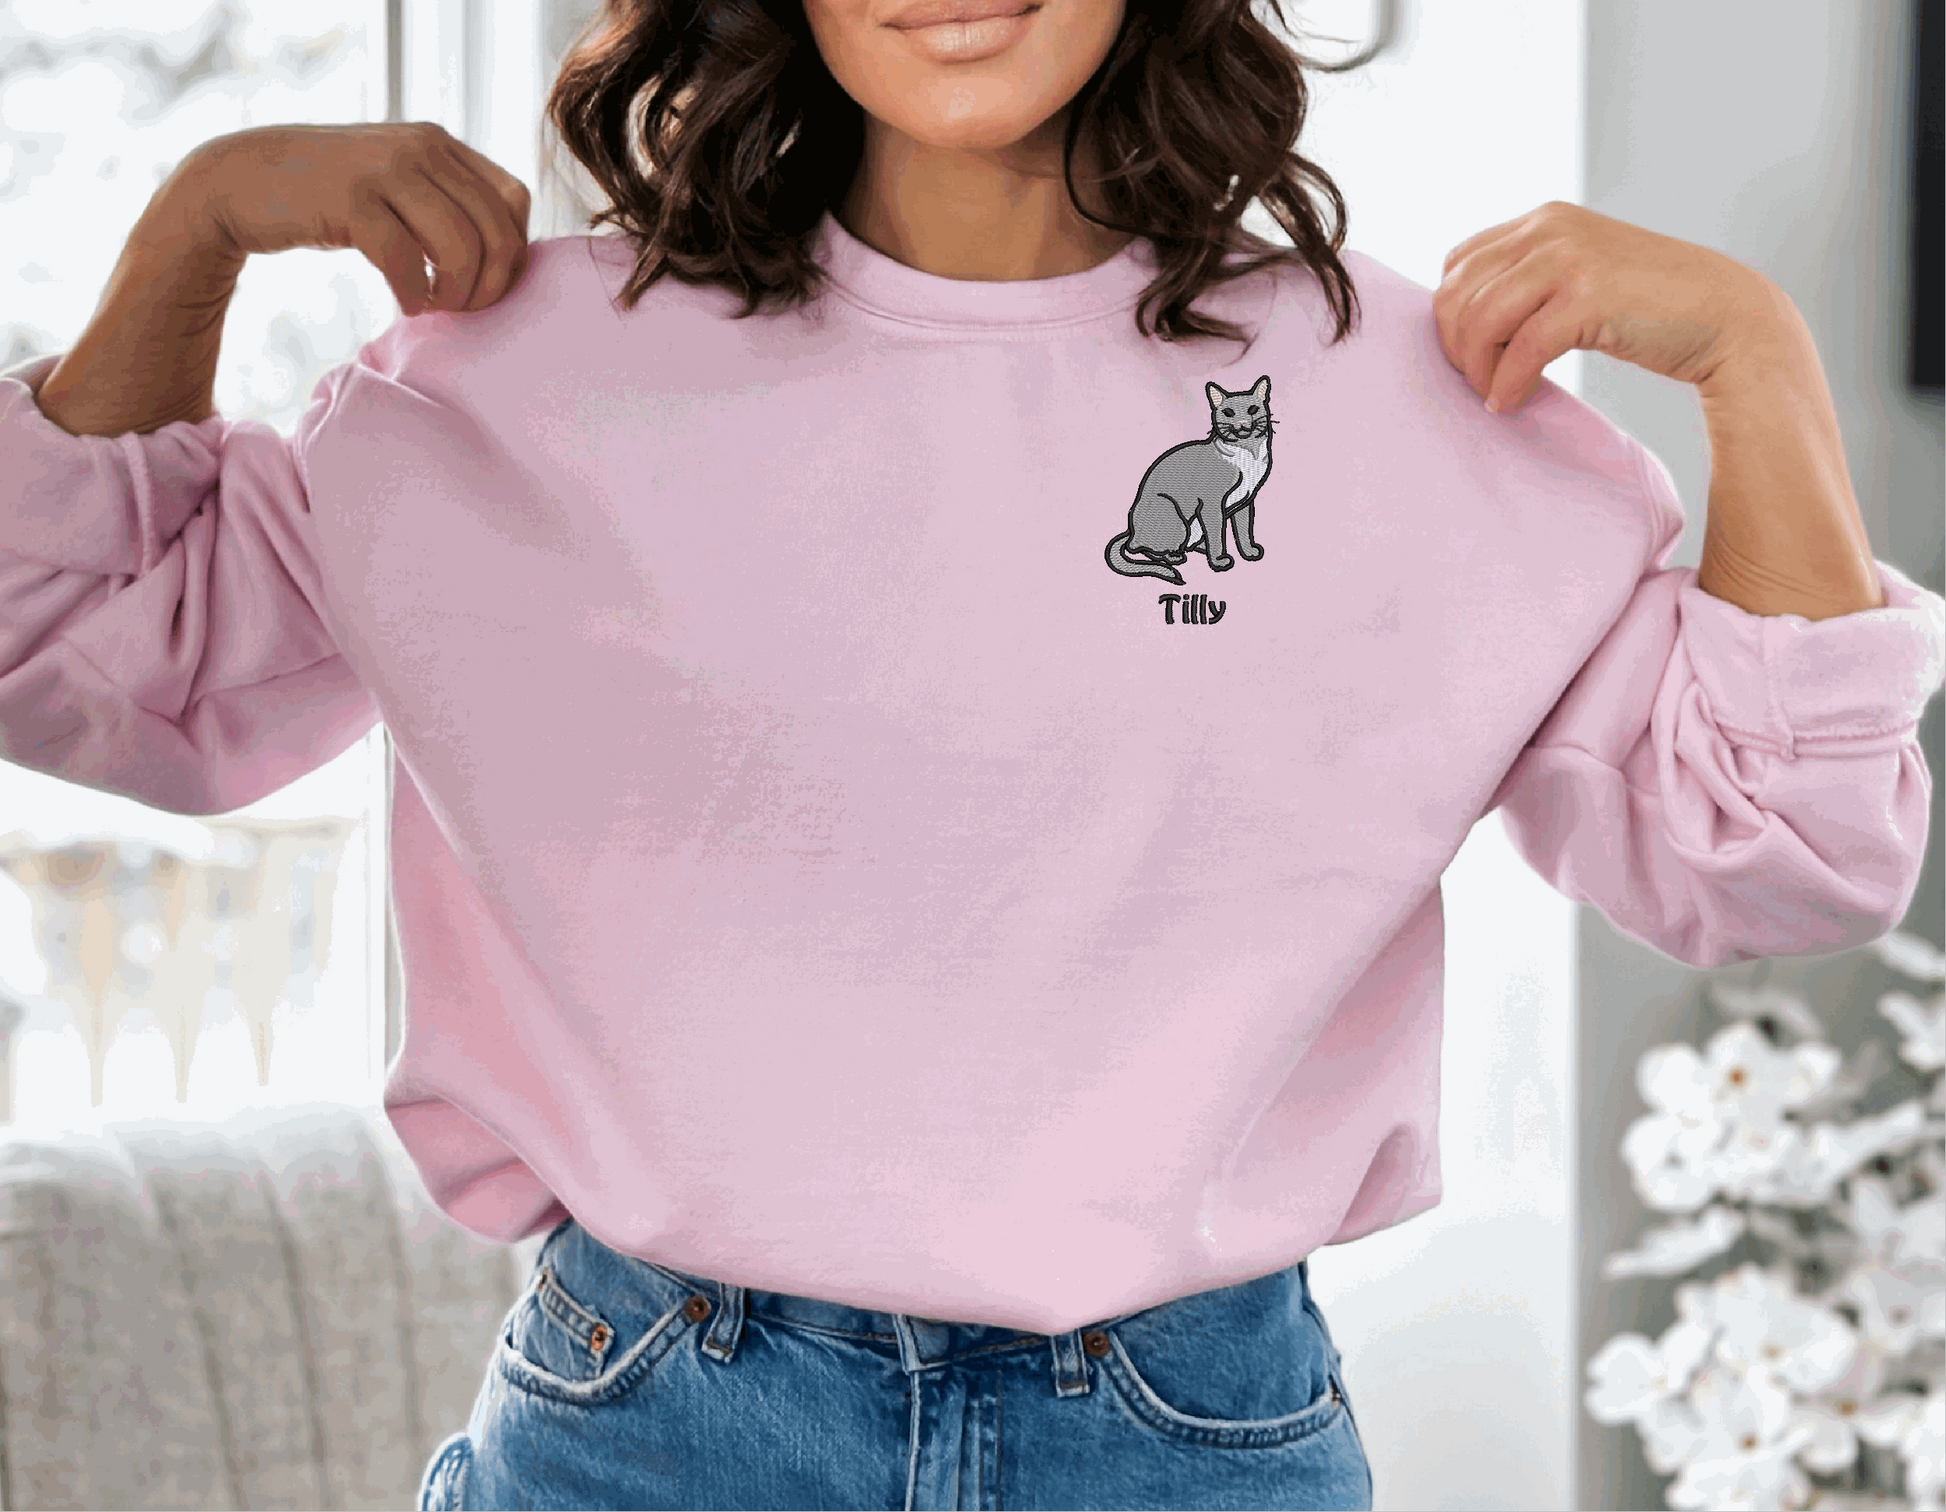 a woman wearing a pink sweatshirt with a cat on it